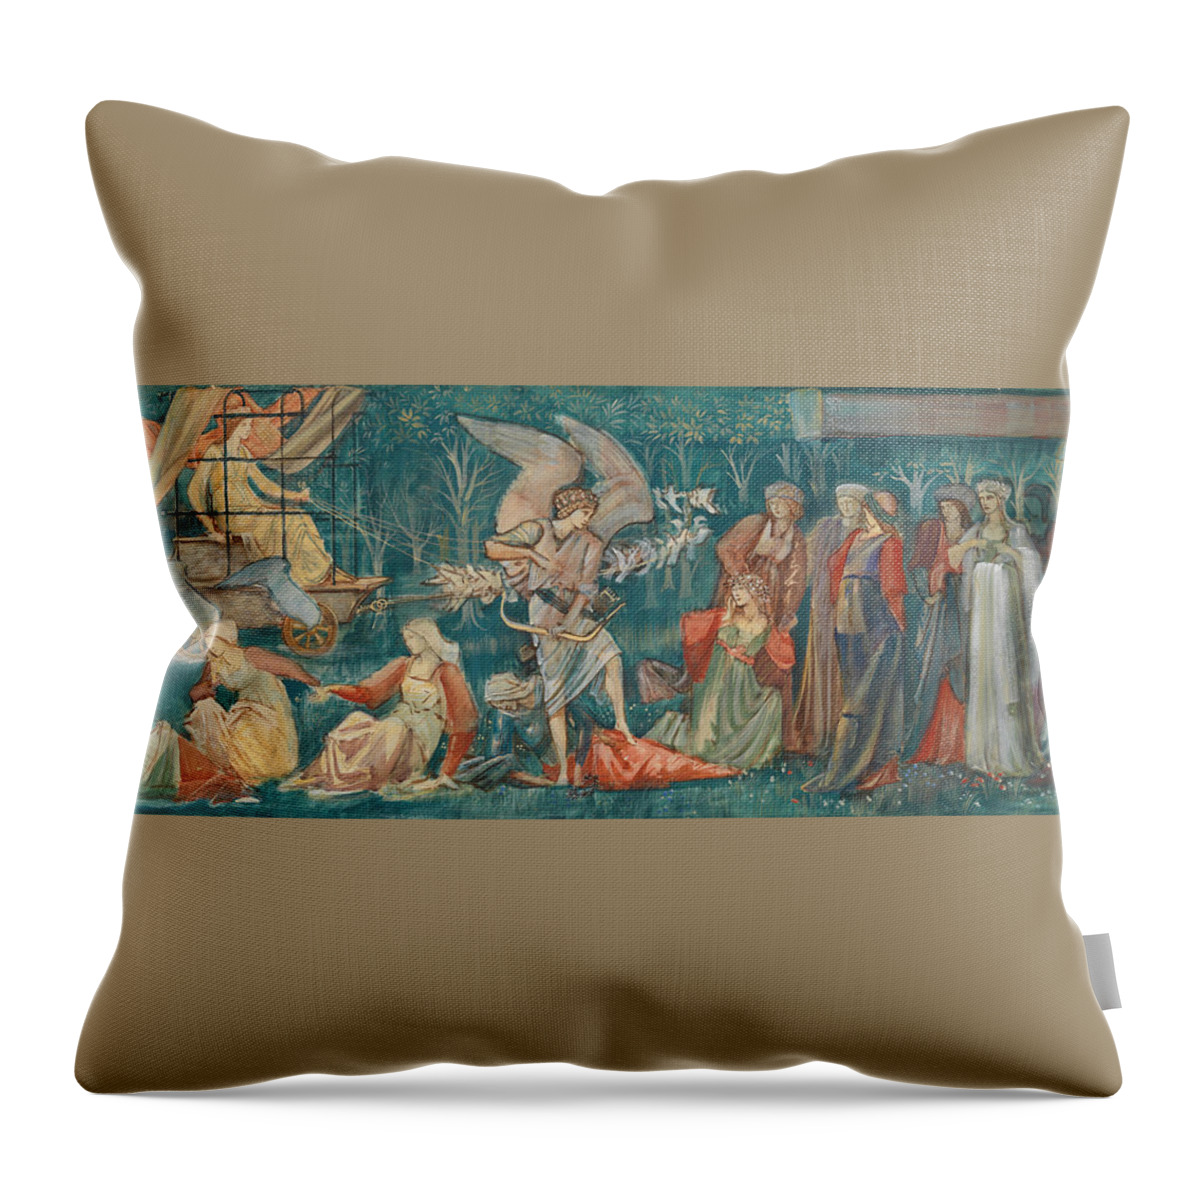 19th Century Art Throw Pillow featuring the drawing The Passing of Venus by Edward Burne-Jones